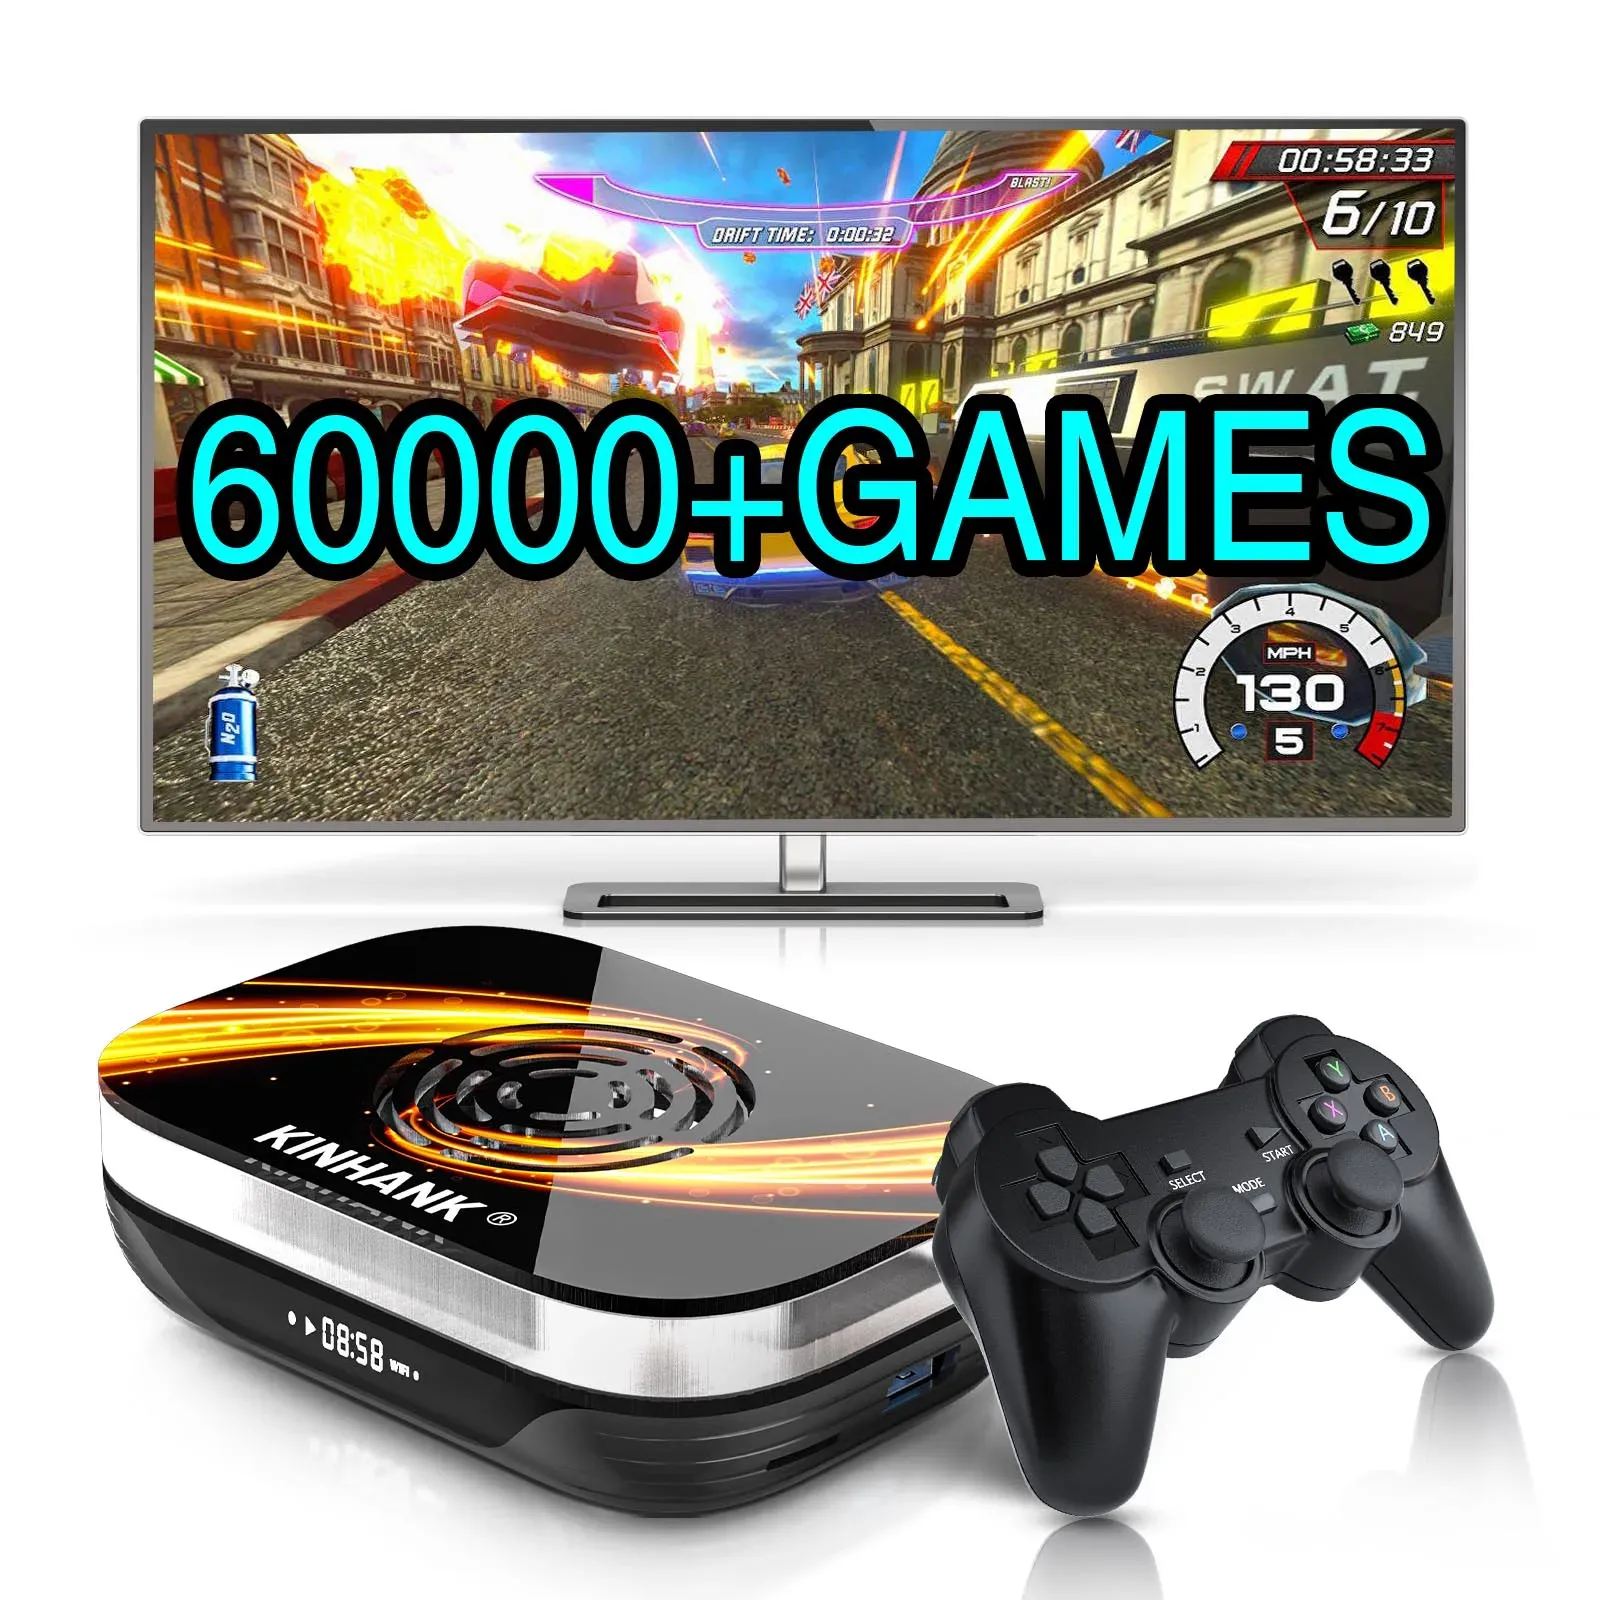 Consoles Super Console X3 Plus TV Video Game Console Android Box in One Support PS1/PSP/SS/DC/N64 Emulators tot 60.000 games